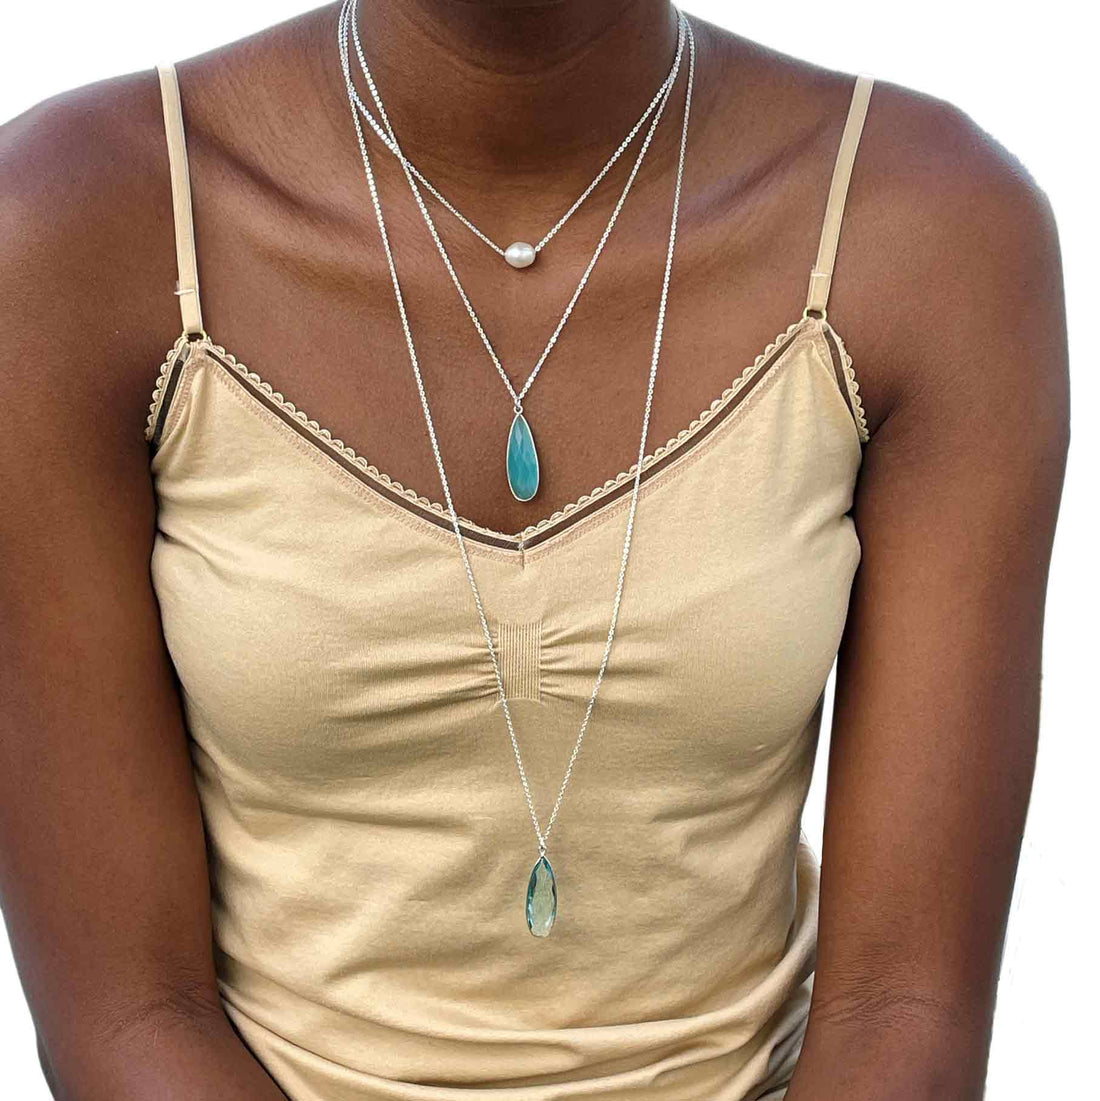 How to layer necklaces without tangling. Prevent tangles by layering different lengths.